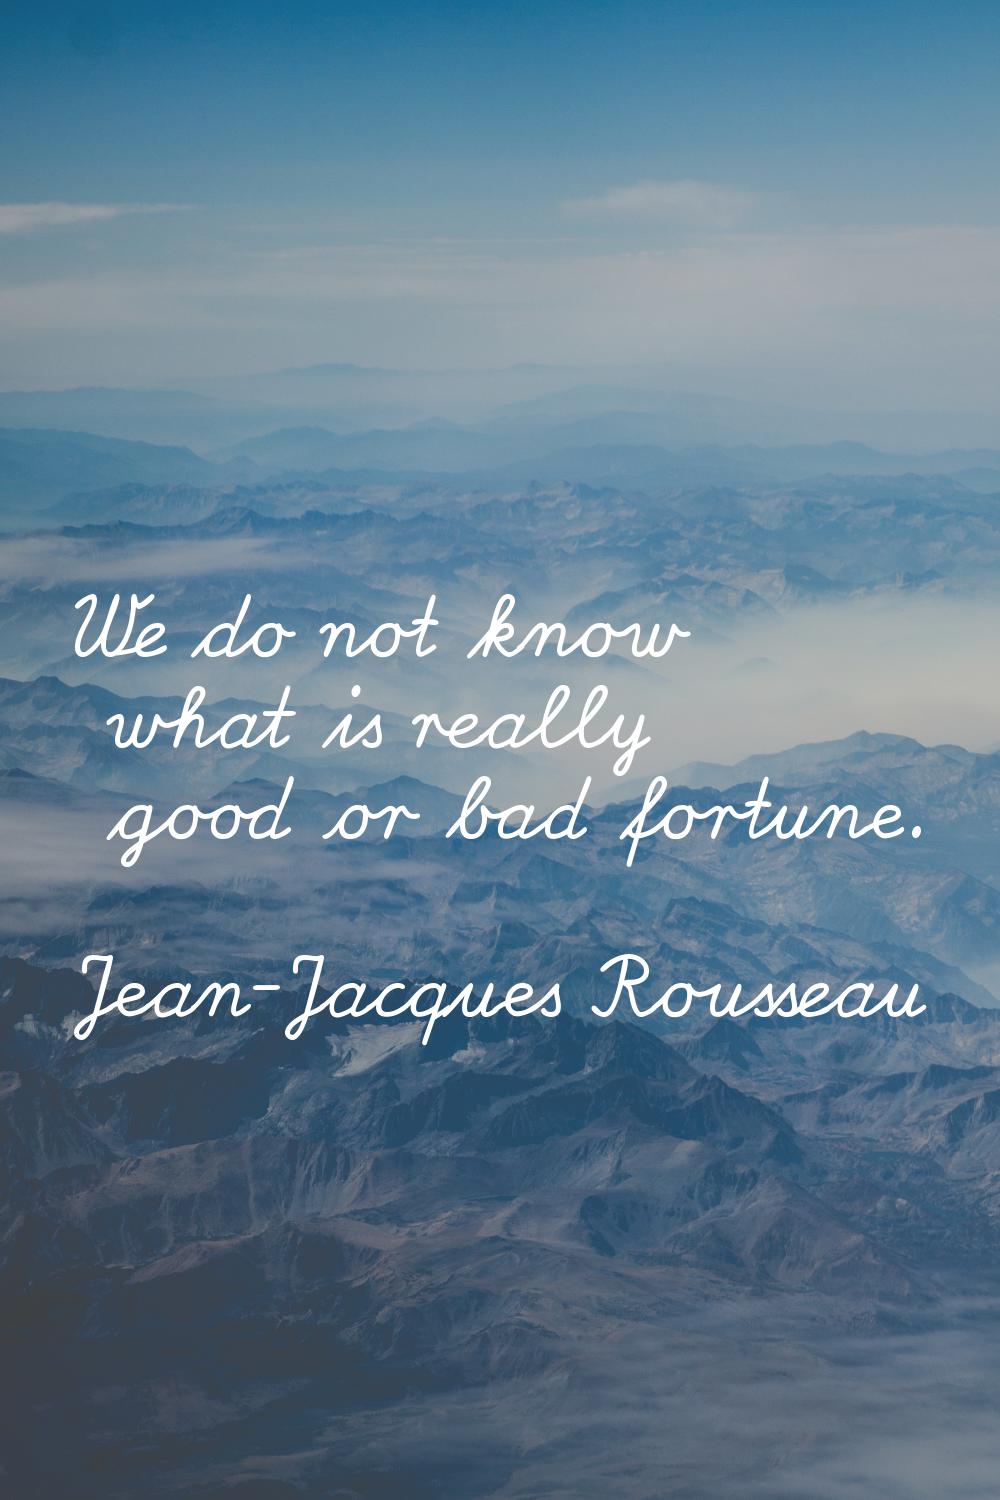 We do not know what is really good or bad fortune.